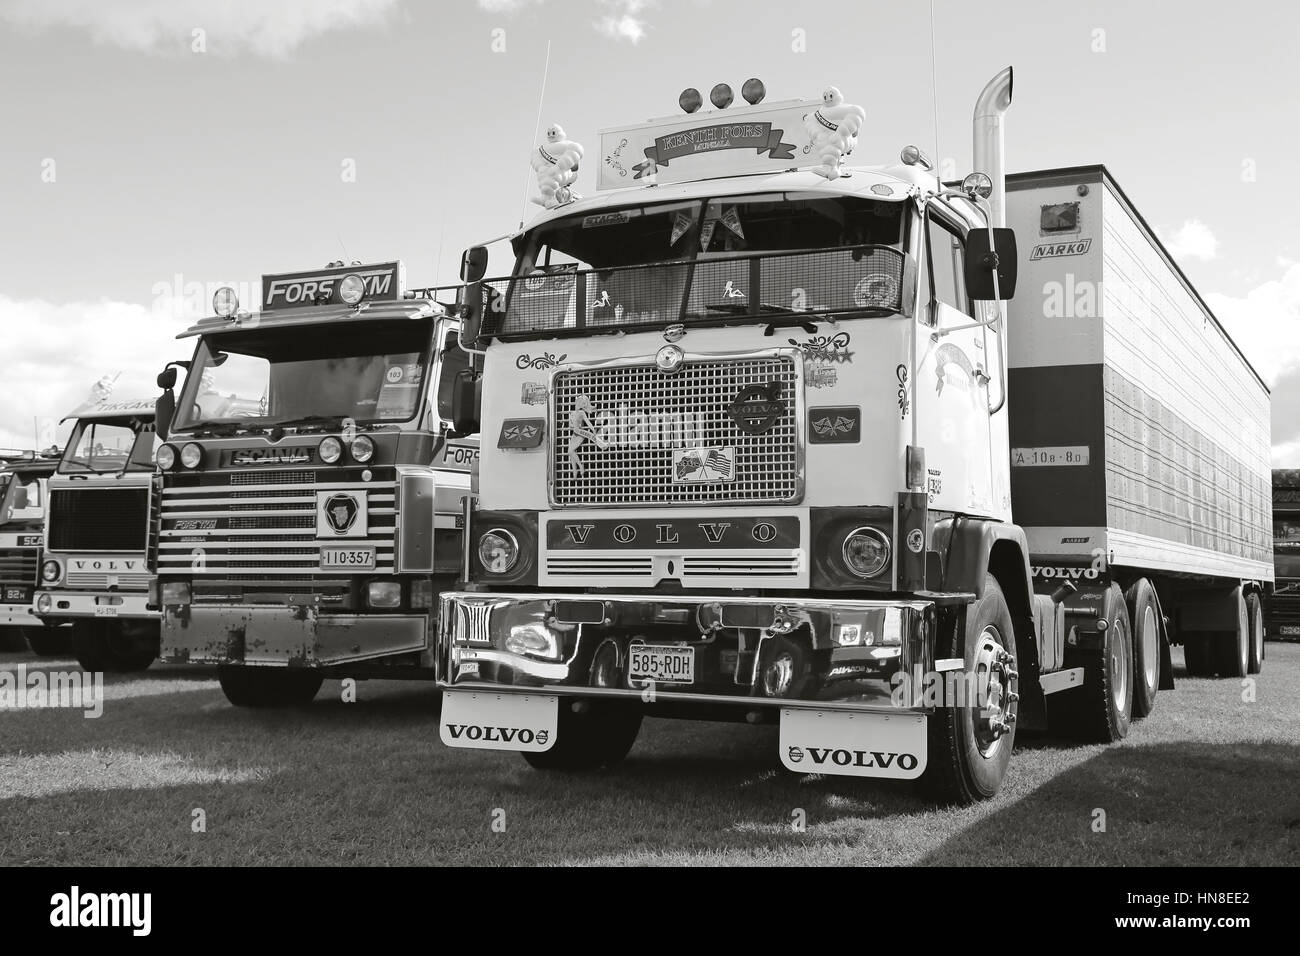 ALAHARMA, FINLAND - AUGUST 12, 2016: Classic Volvo F88 Kenth Fors from Munsala among more nostalgy show trucks on Power Truck Show 2016, Finland, in b Stock Photo